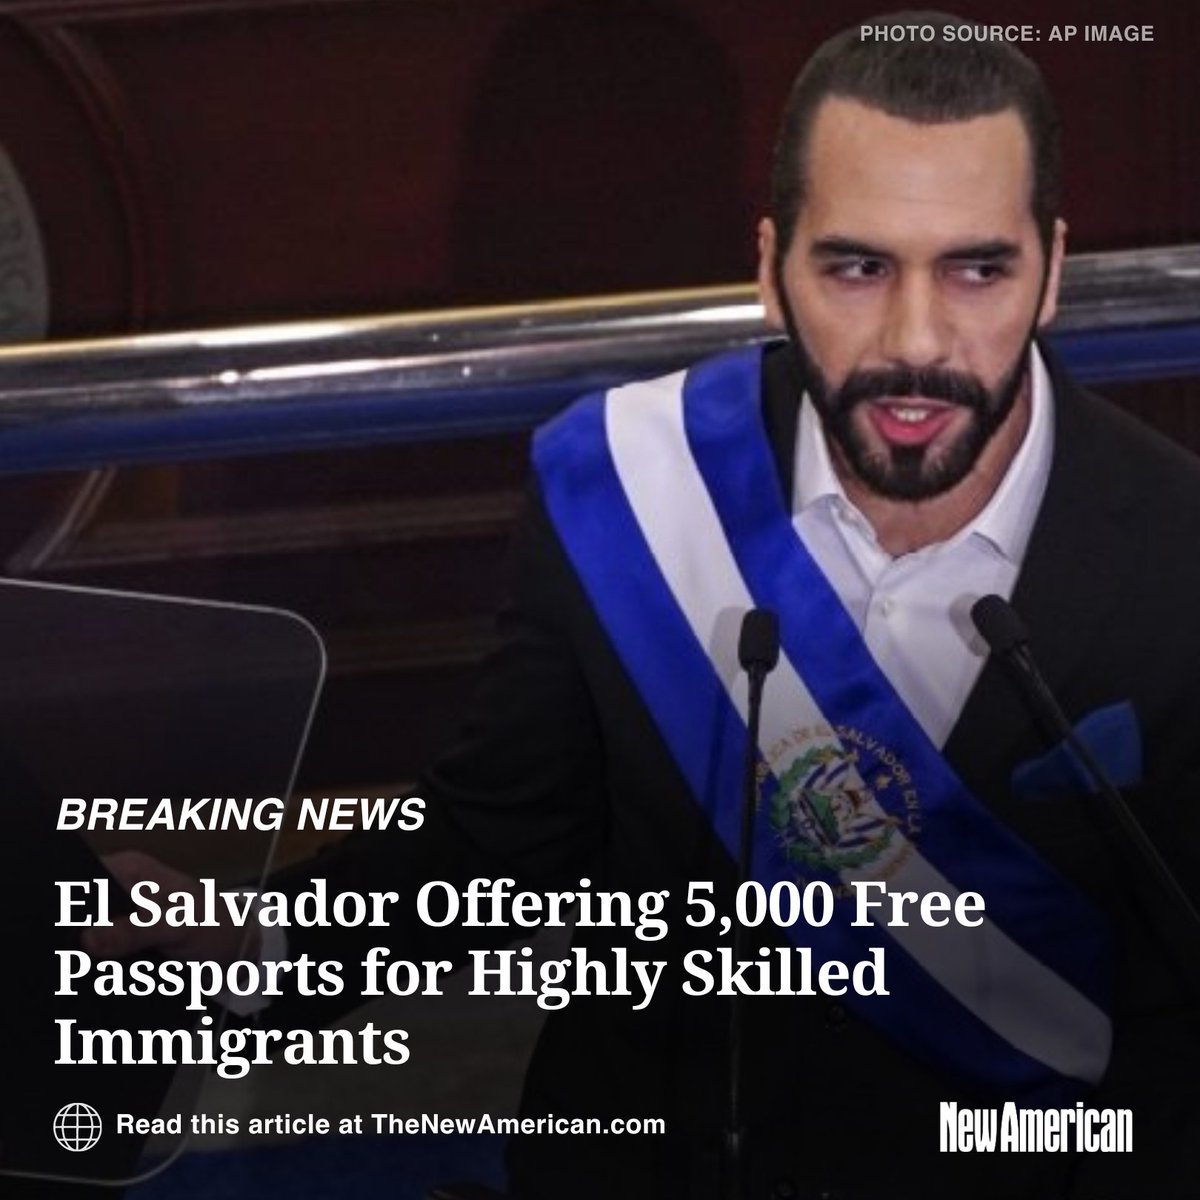 President of El Salvador #NayibBukele announced the country would be offering 5,000 FREE passports to HIGHLY skilled individuals from abroad, stating on X, “We’re offering 5,000 free passports (equivalent to $5 billion in our passport program) to highly skilled scientists,…